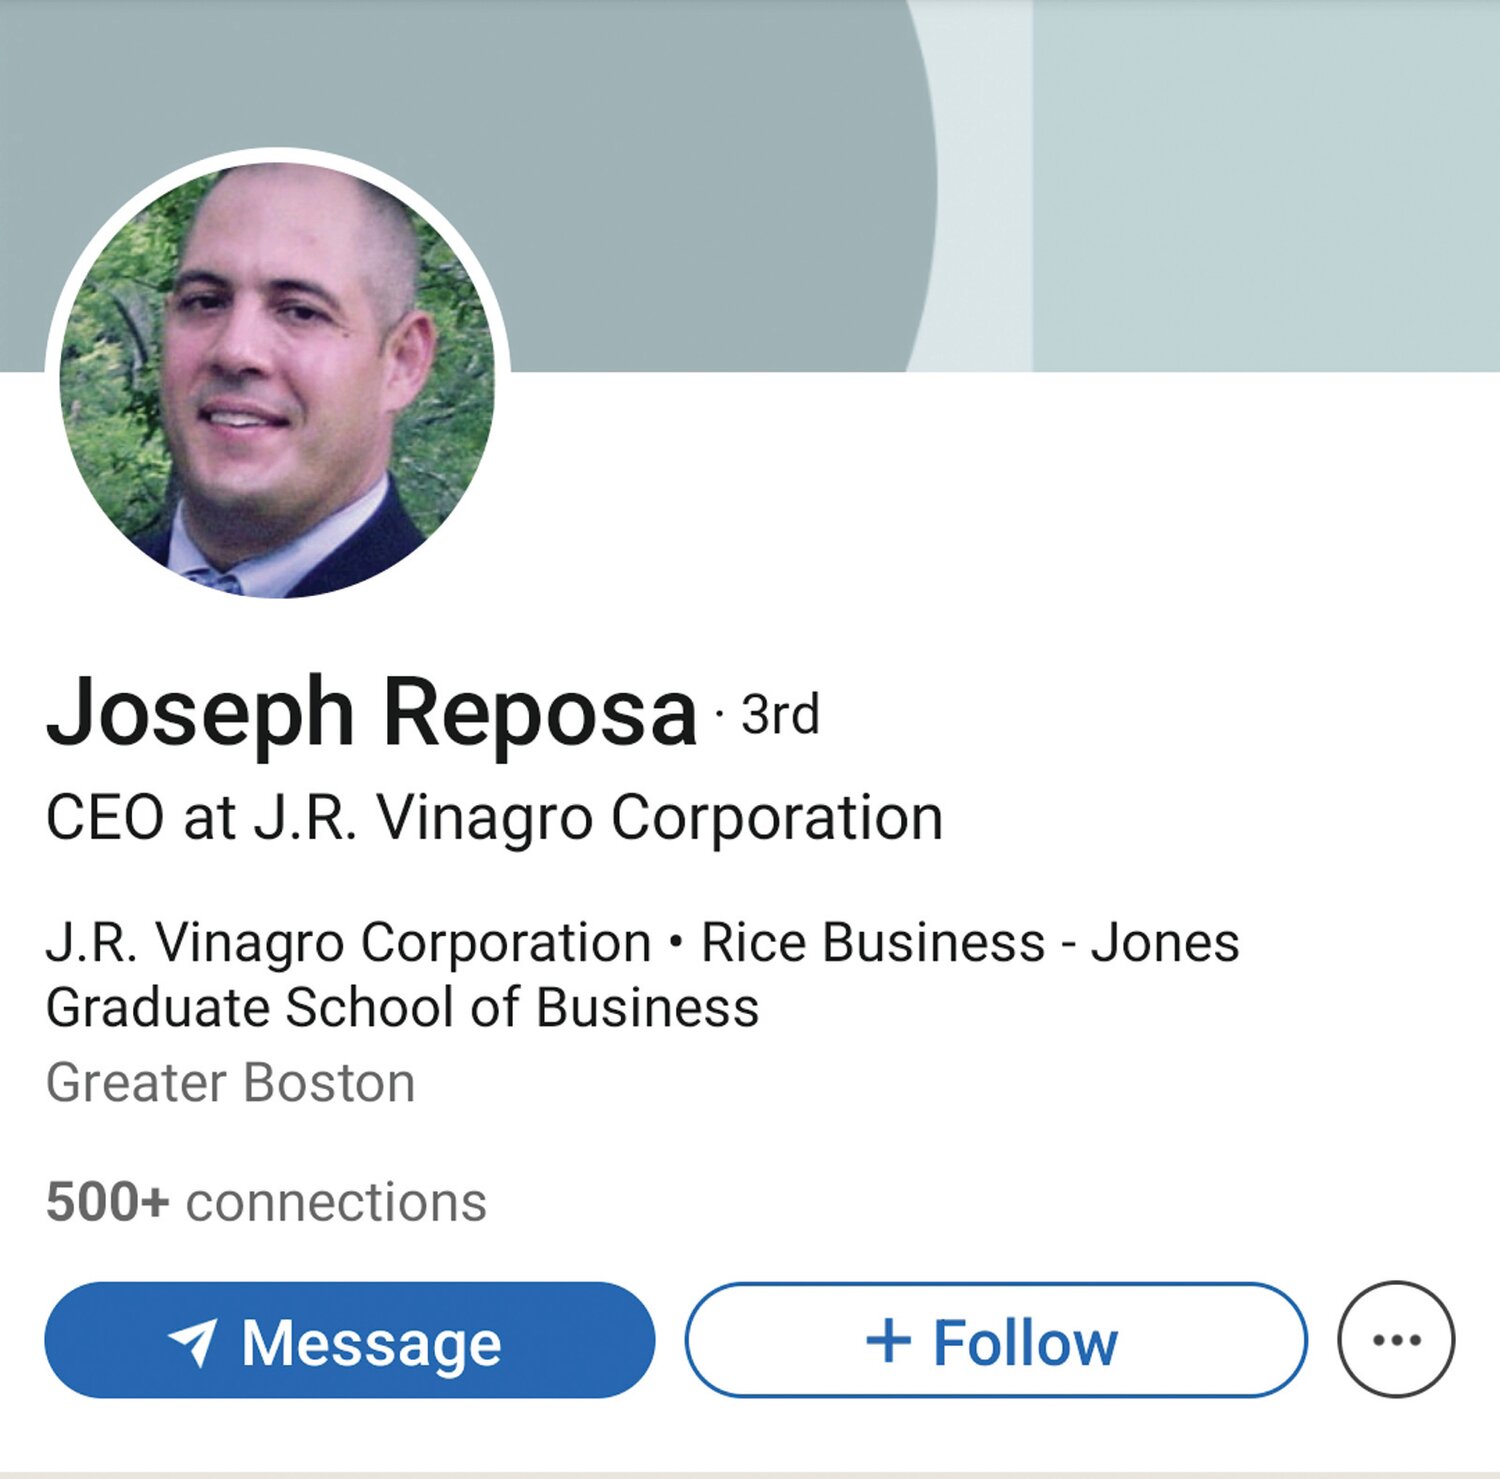 NEW BOSS: Former Rhode Island Resource Recovery Corporation (RIRRC) Executive Director Joseph Reposa announced on Linked In that he has been hired as J.R. Vinagro’s new CEO.